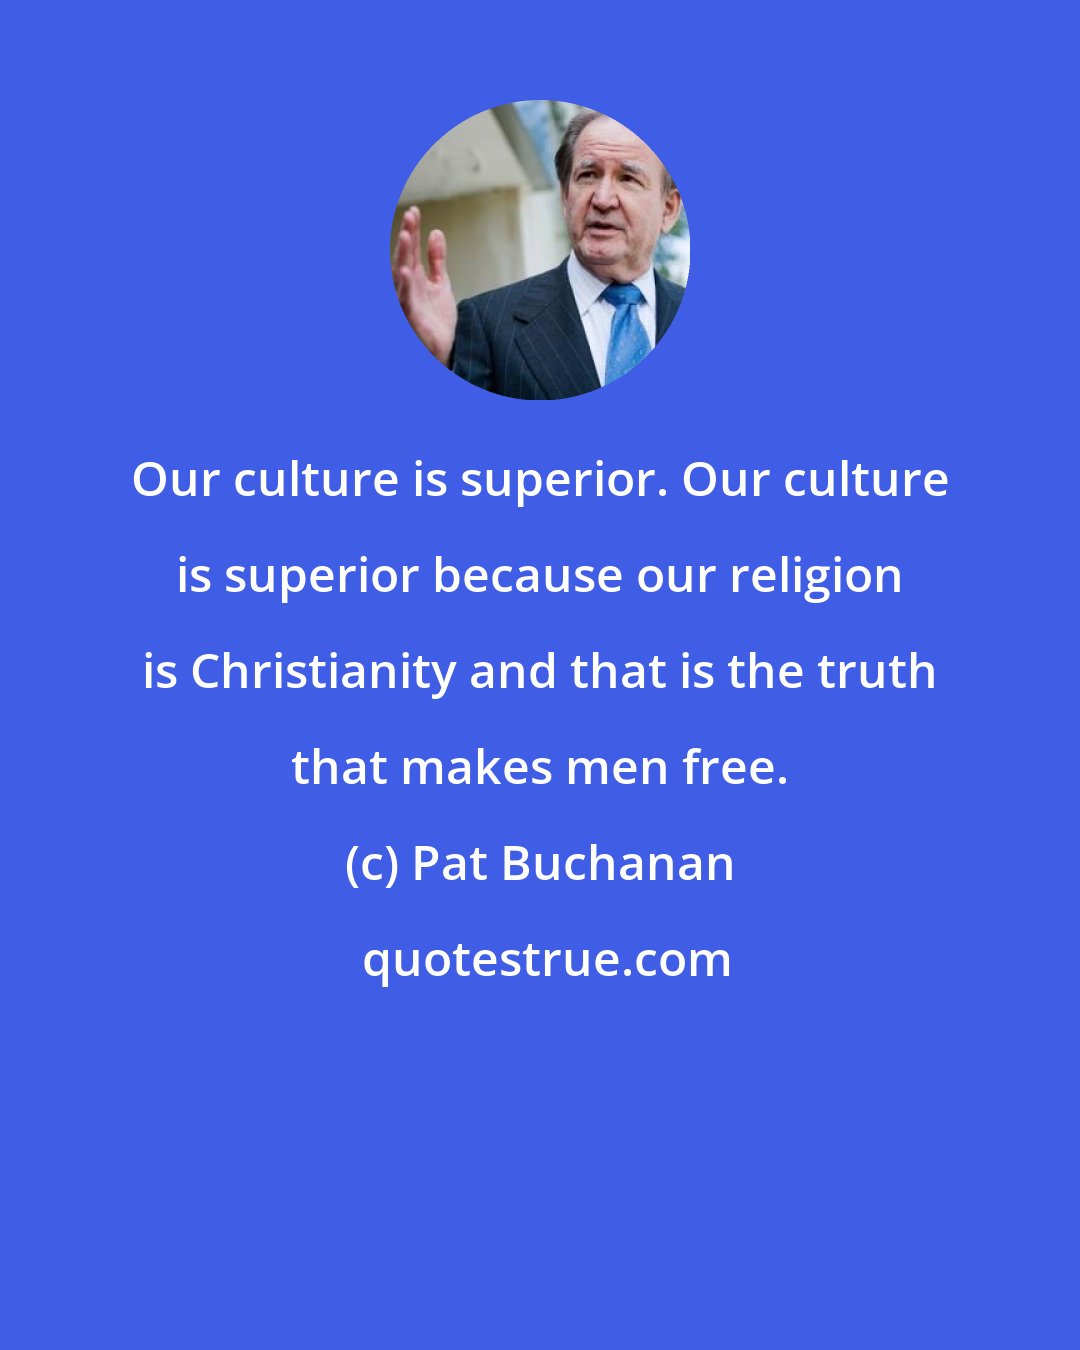 Pat Buchanan: Our culture is superior. Our culture is superior because our religion is Christianity and that is the truth that makes men free.